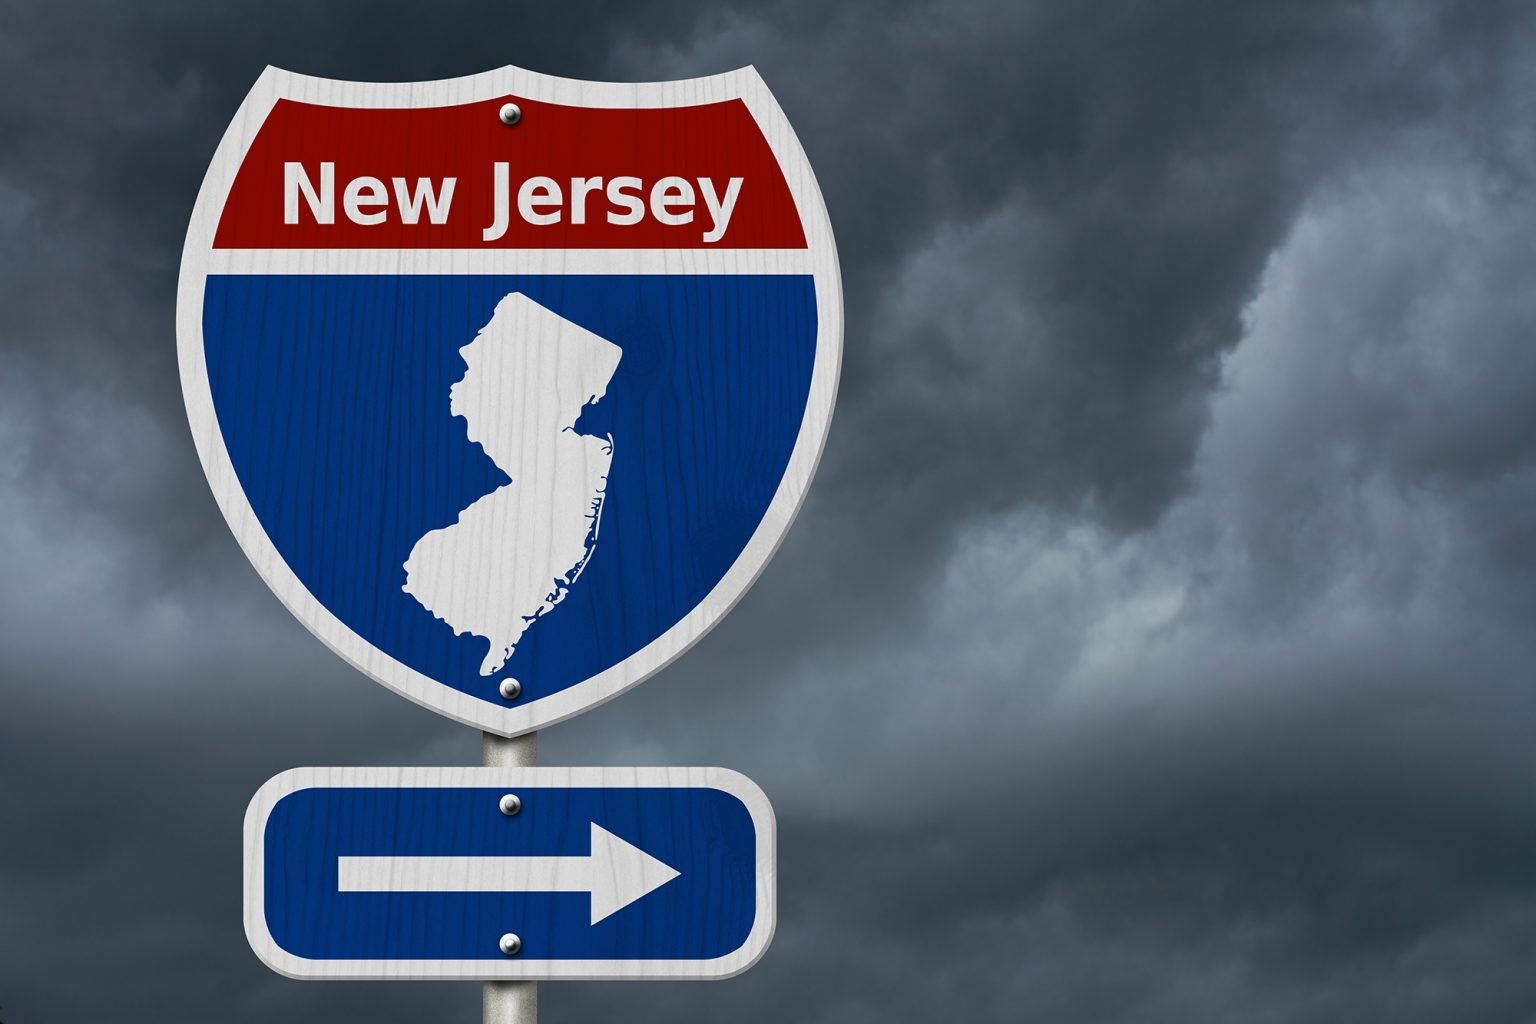 New Jersey road sign with stormy background